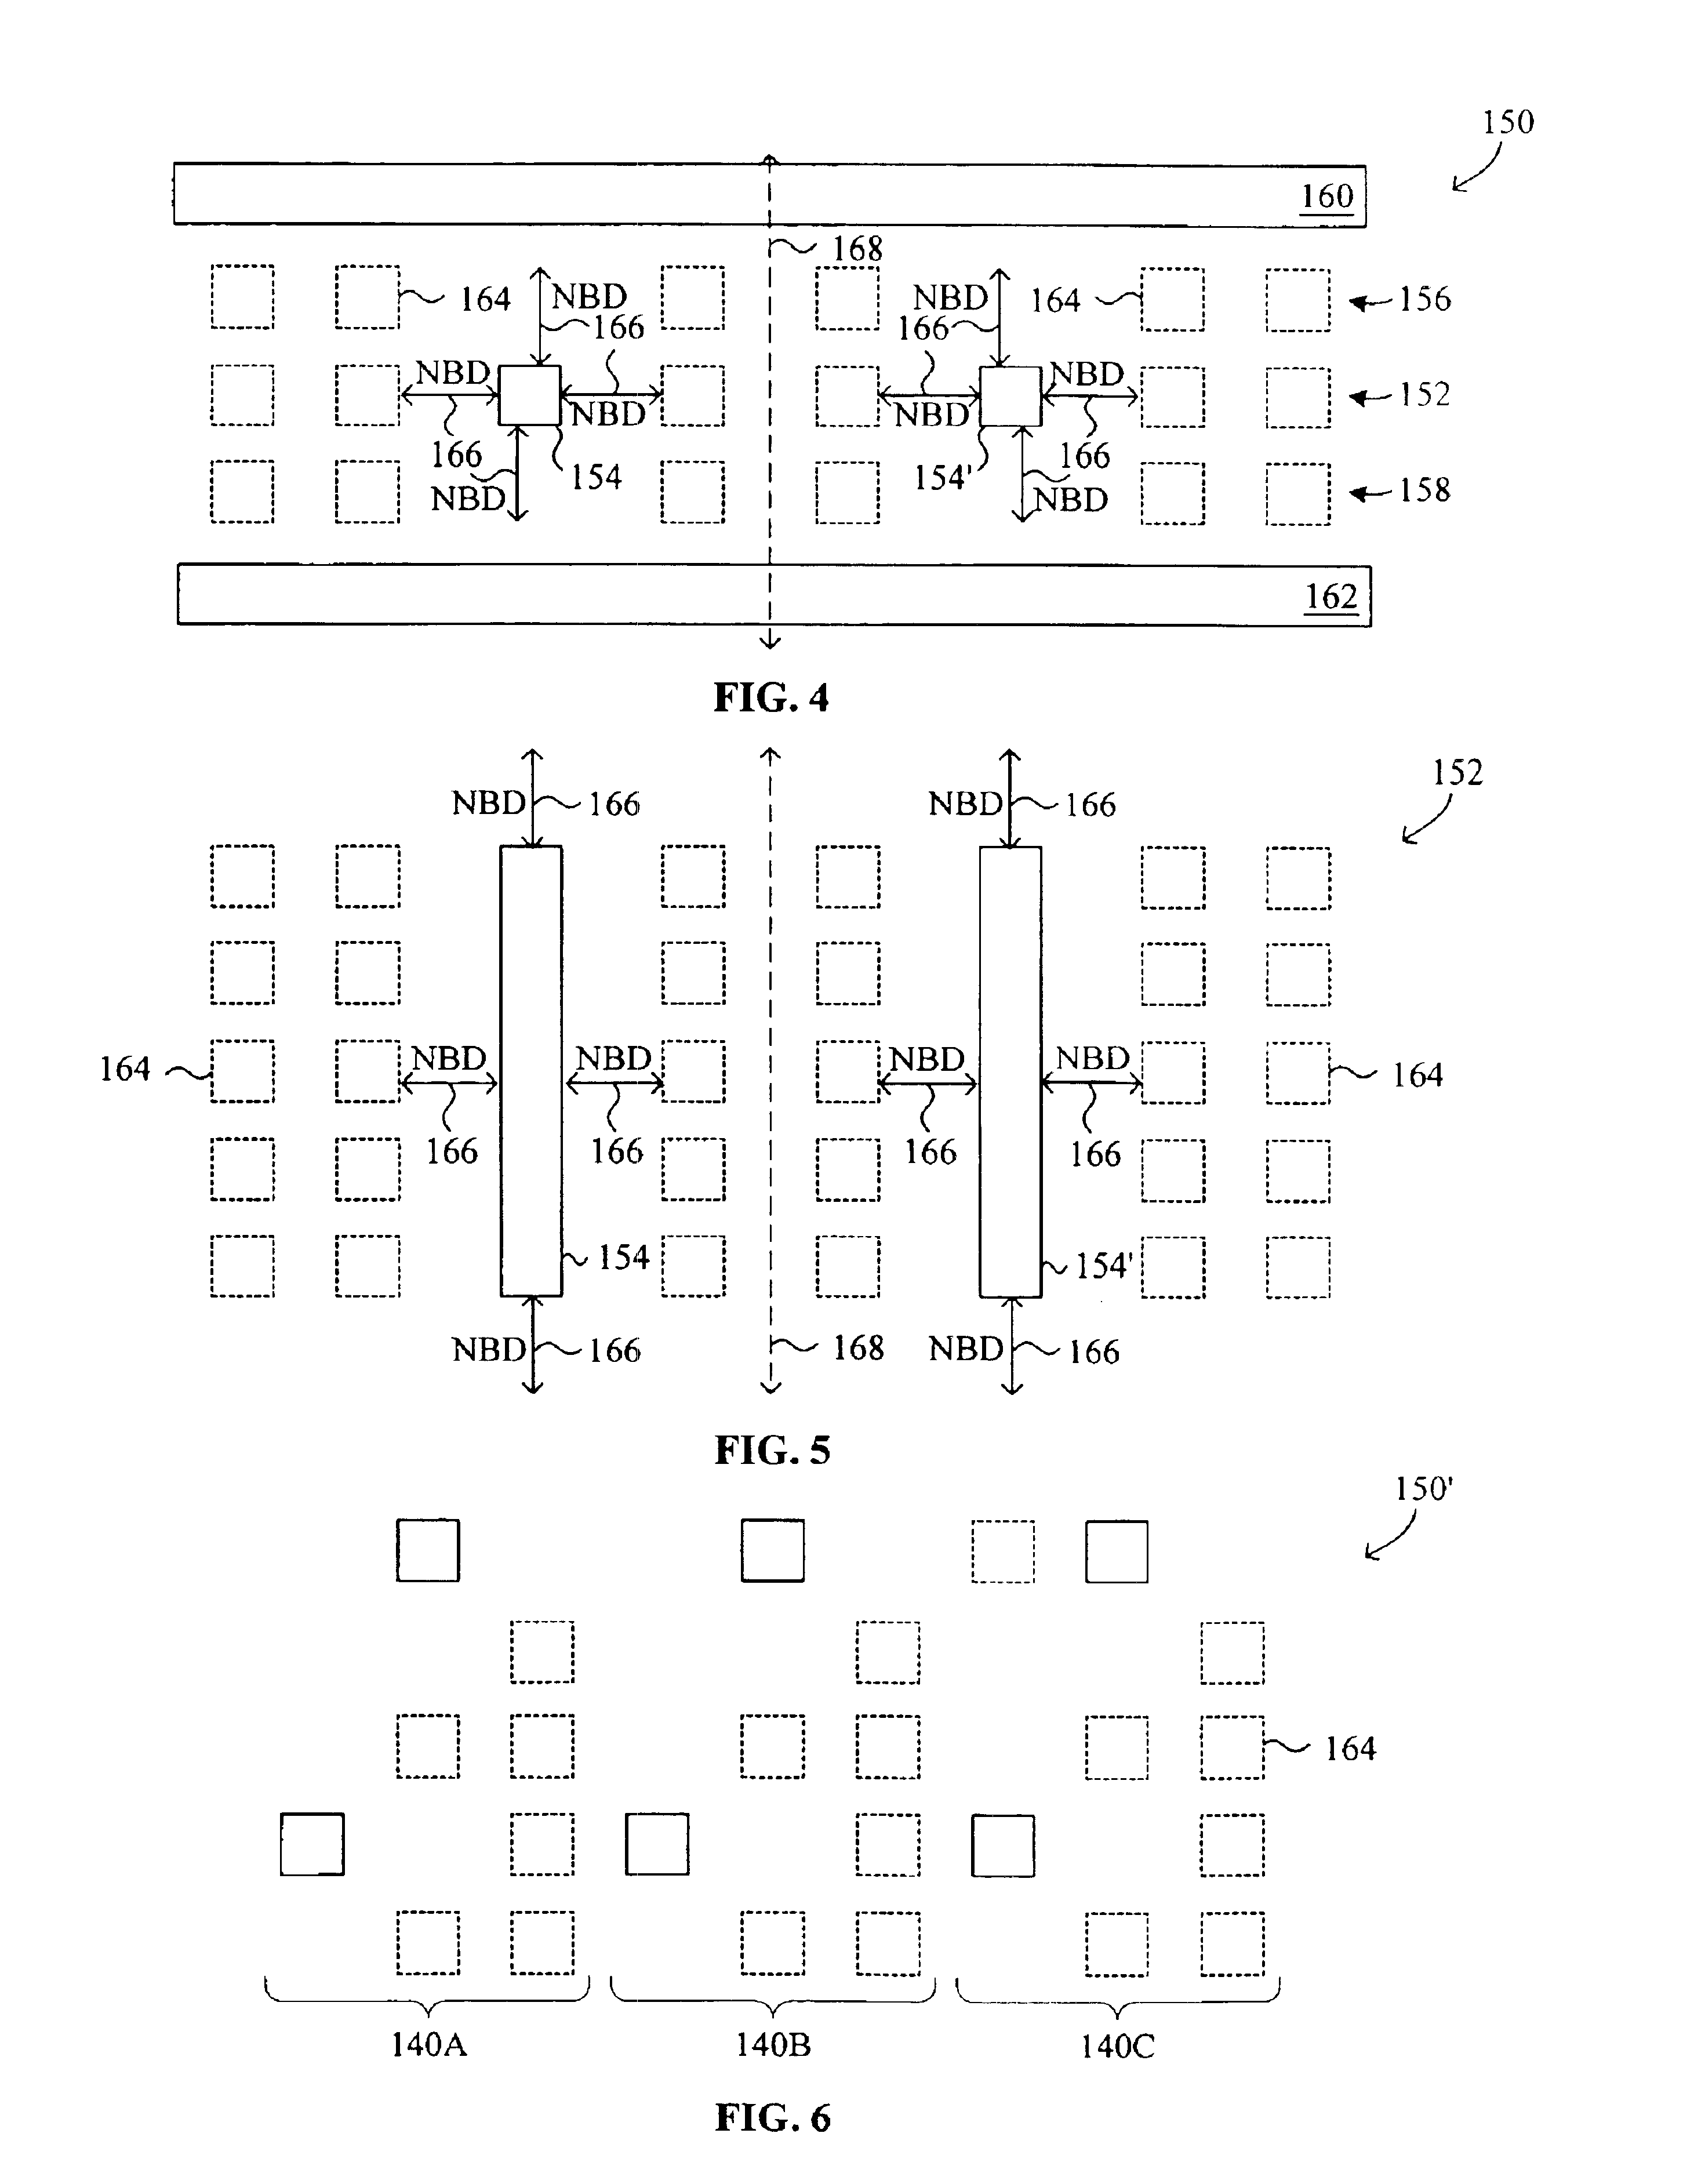 System and method for placement of dummy metal fills while preserving device matching and/or limiting capacitance increase